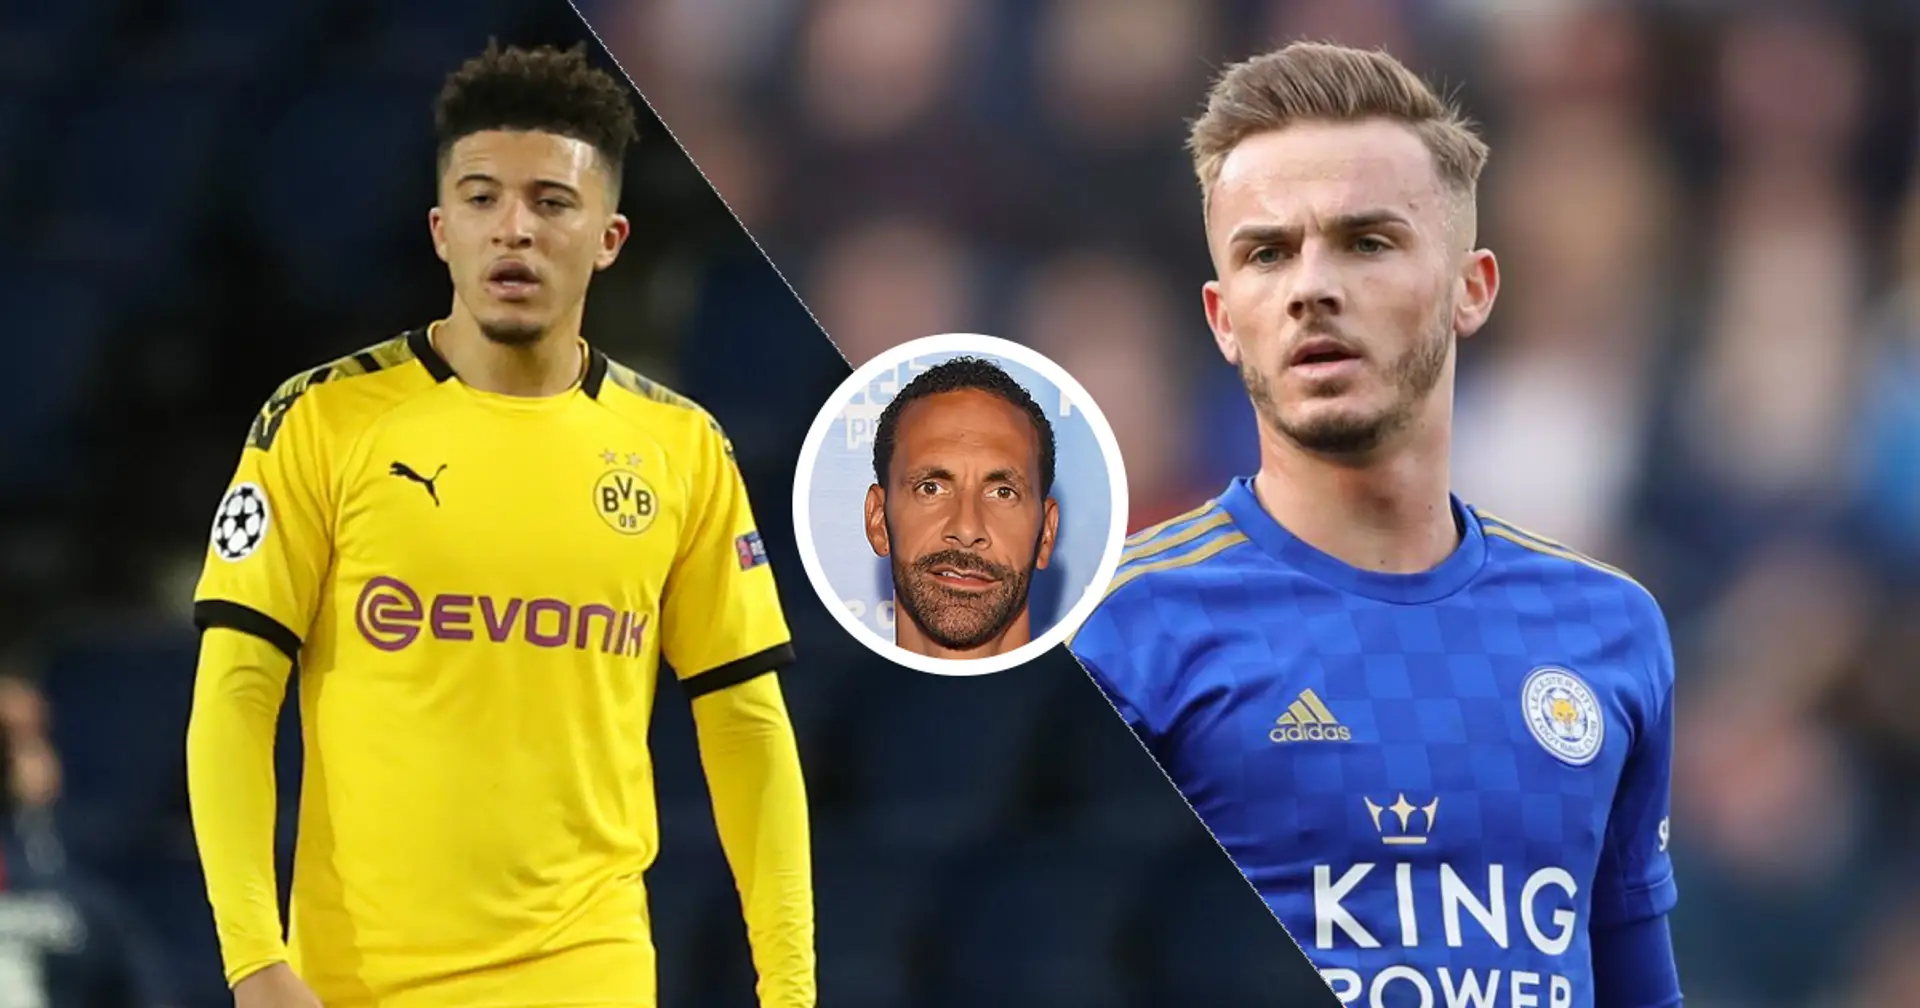 Man United's targets: here's what Rio Ferdinand thinks about each player